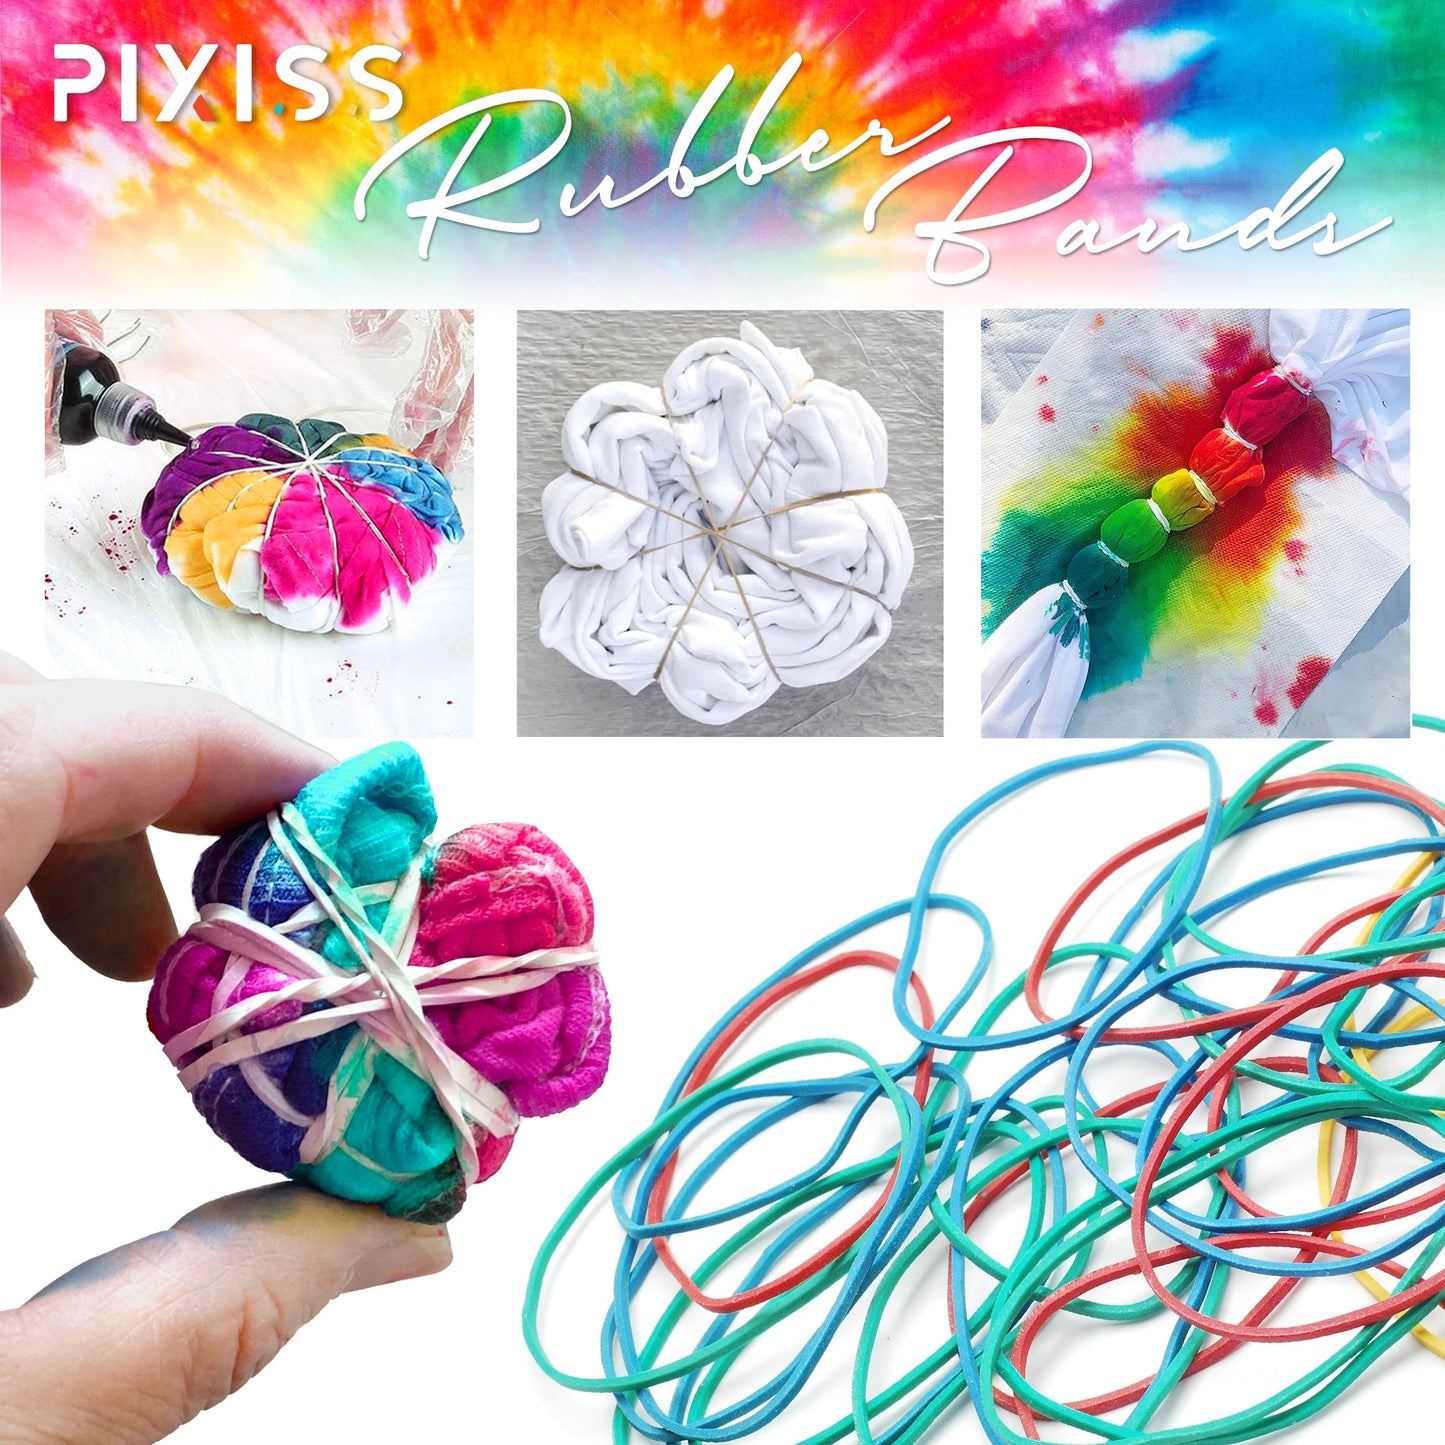 PIXISS 1oz. Rubber Band Pack - Various Sizes by Pixiss